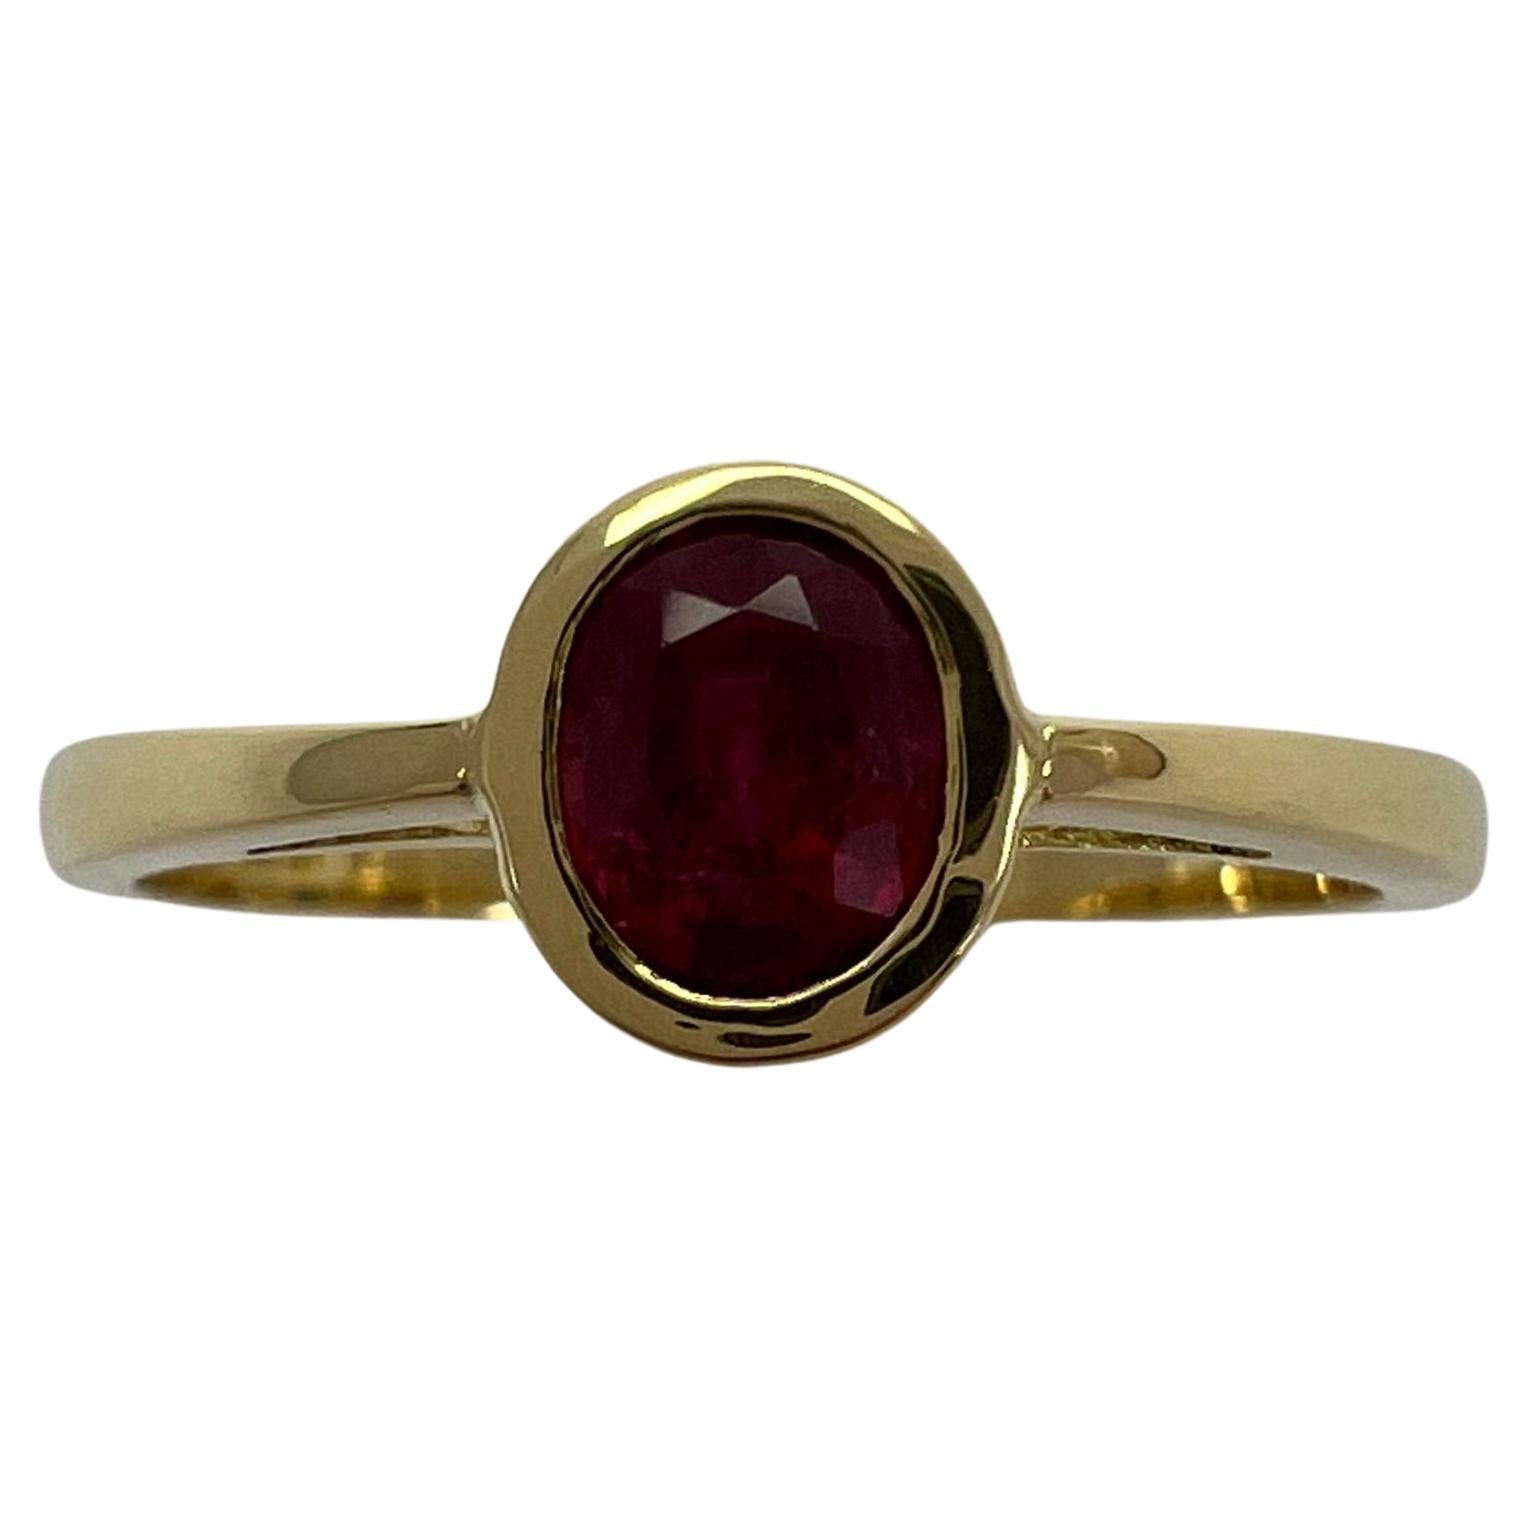 0,75ct Vivid Red Ruby Oval Cut 18k Gelbgold Lünette Rubover Solitaire Ring im Angebot